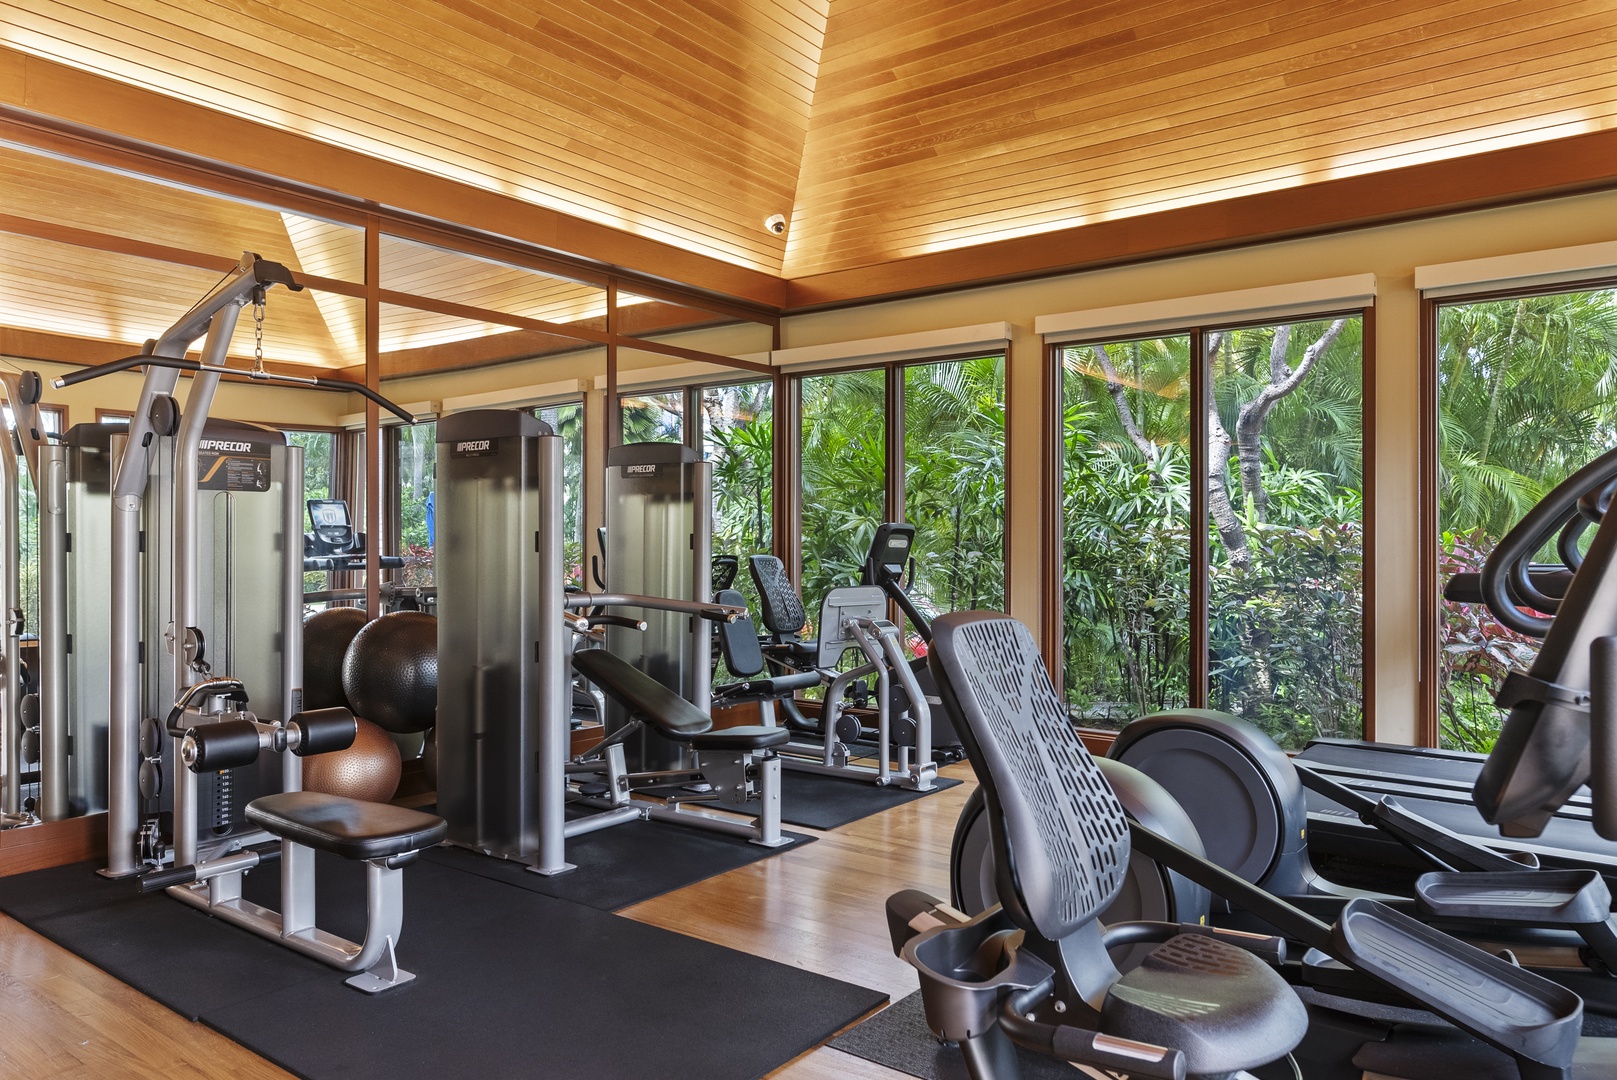 Honolulu Vacation Rentals, Watermark Waikiki Unit 901 - The community has a gym with large windows for relaxing views.